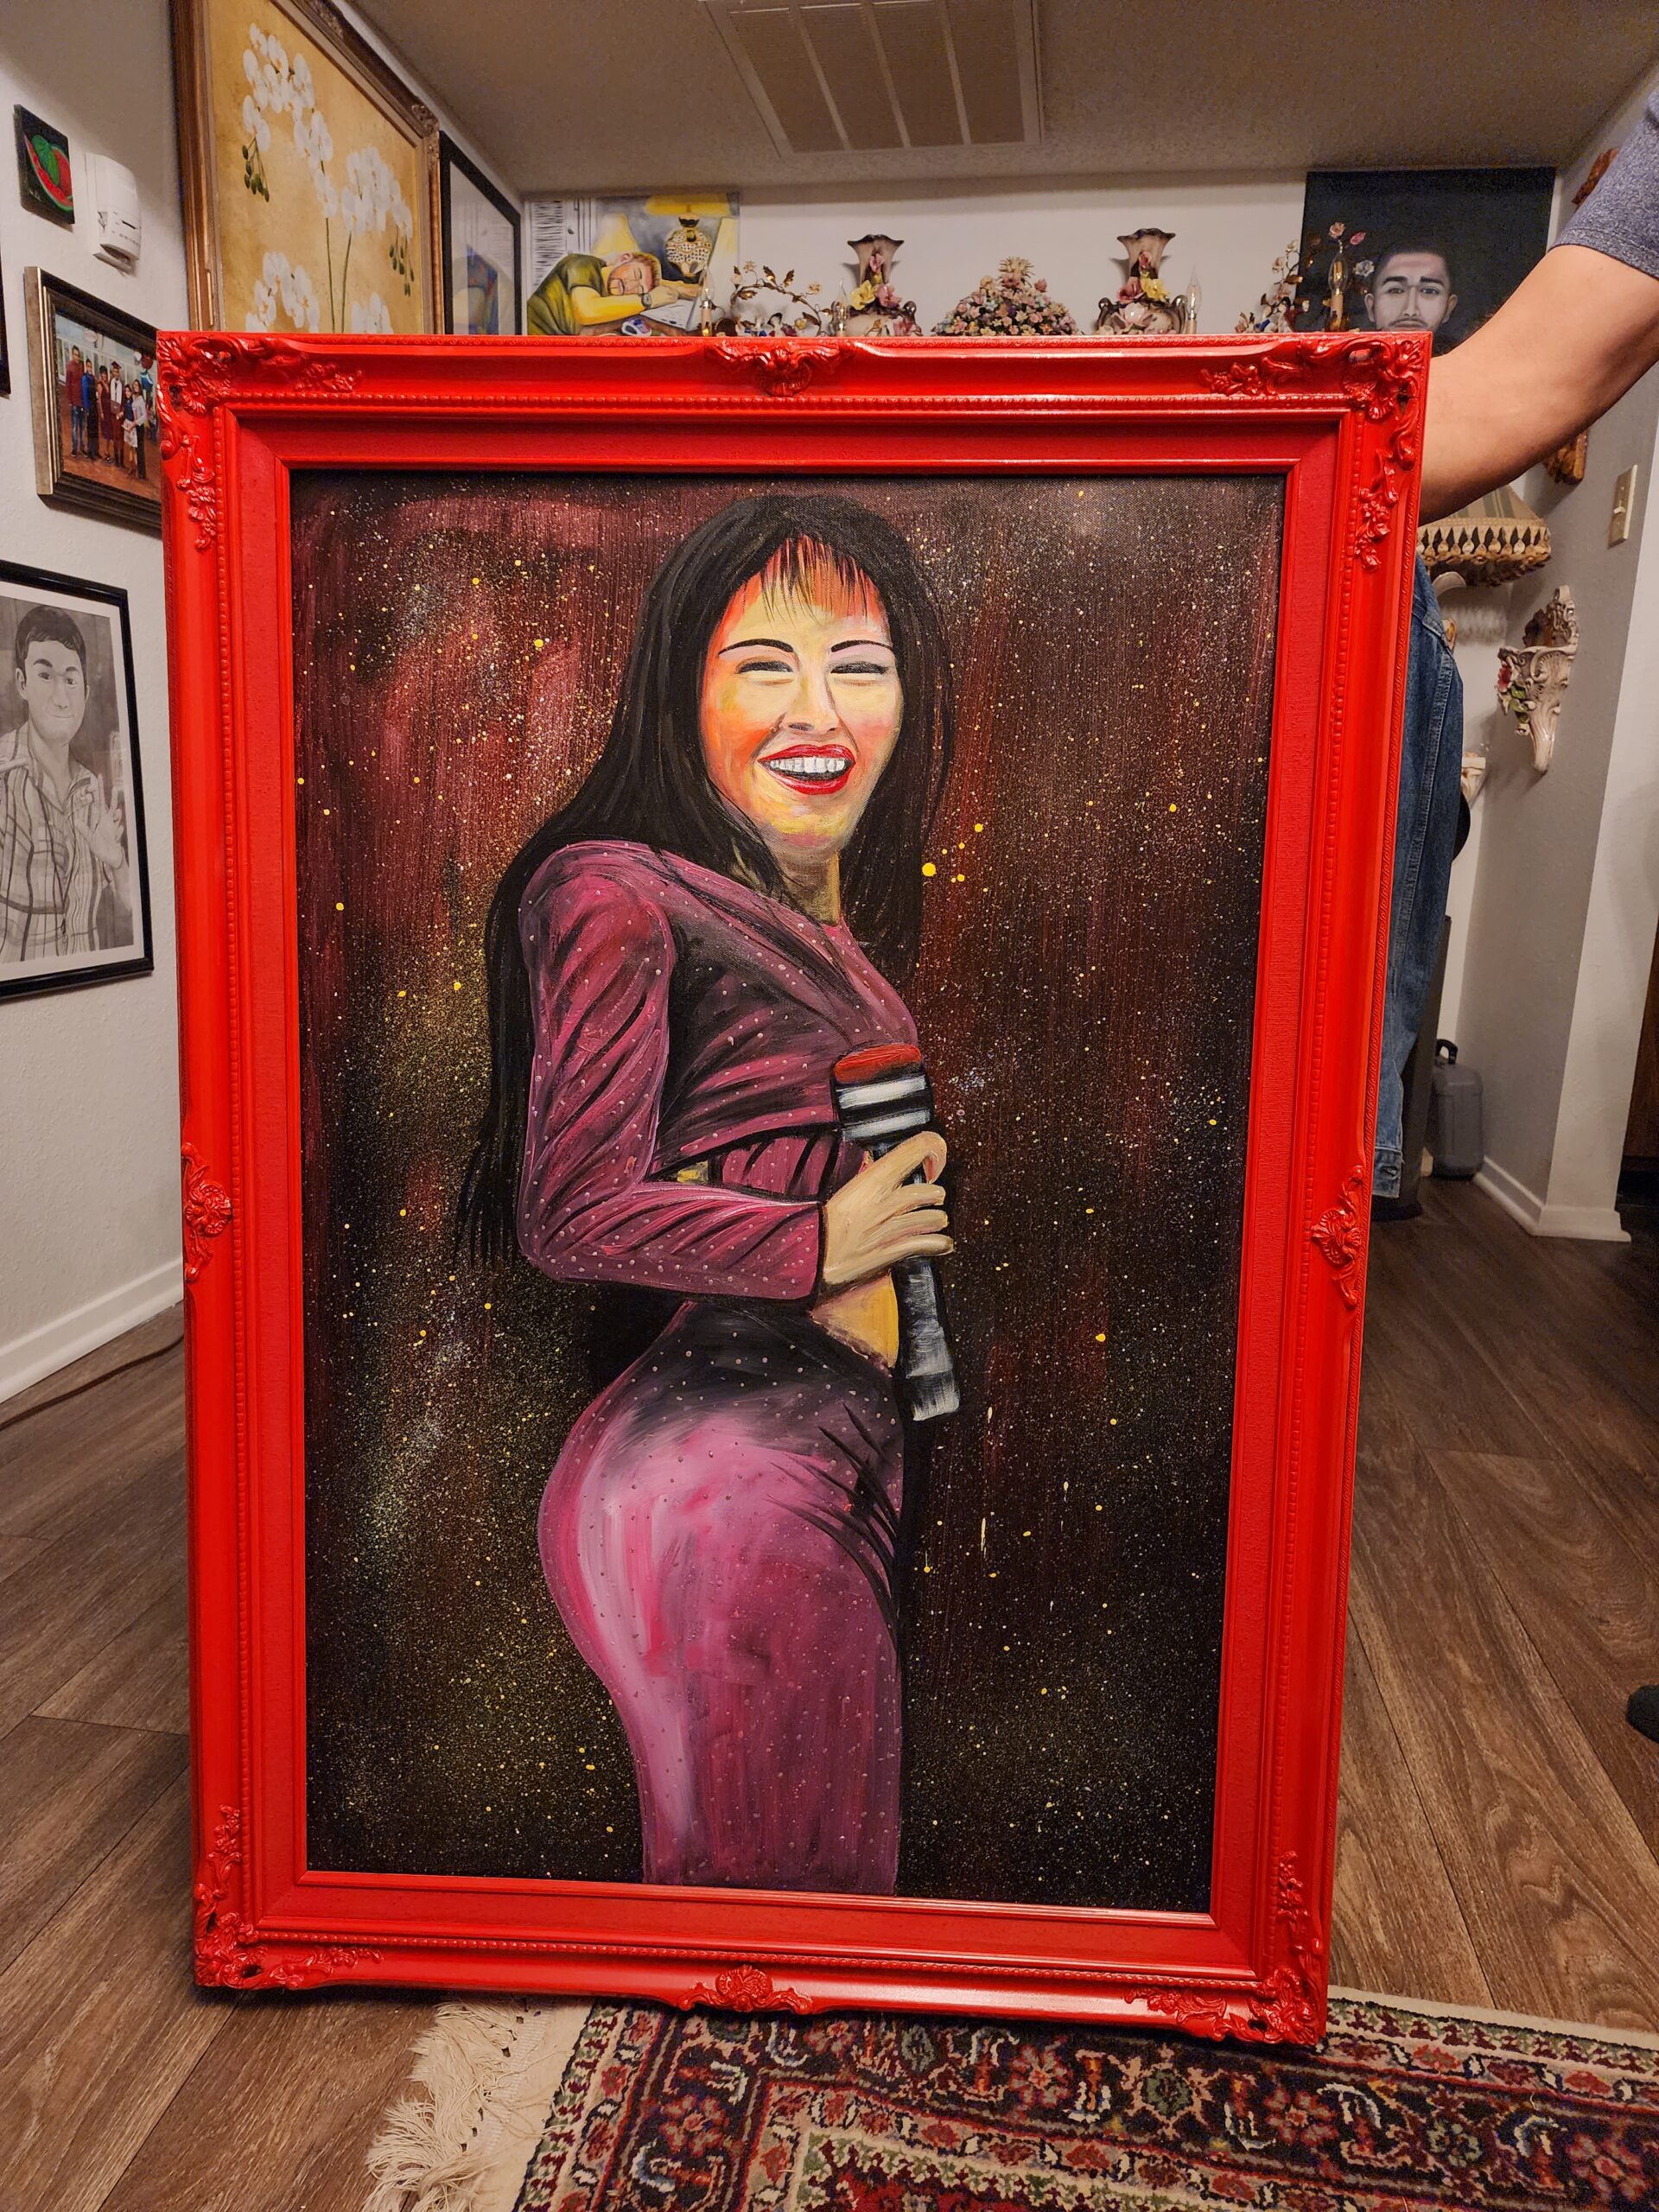 Original acrylic painting making rendition to the most eminent and famous Tejano singer Selena Quintanilla. Inspired in her last live concert recorded on February 26, 1995, at the Houston Astrodome.